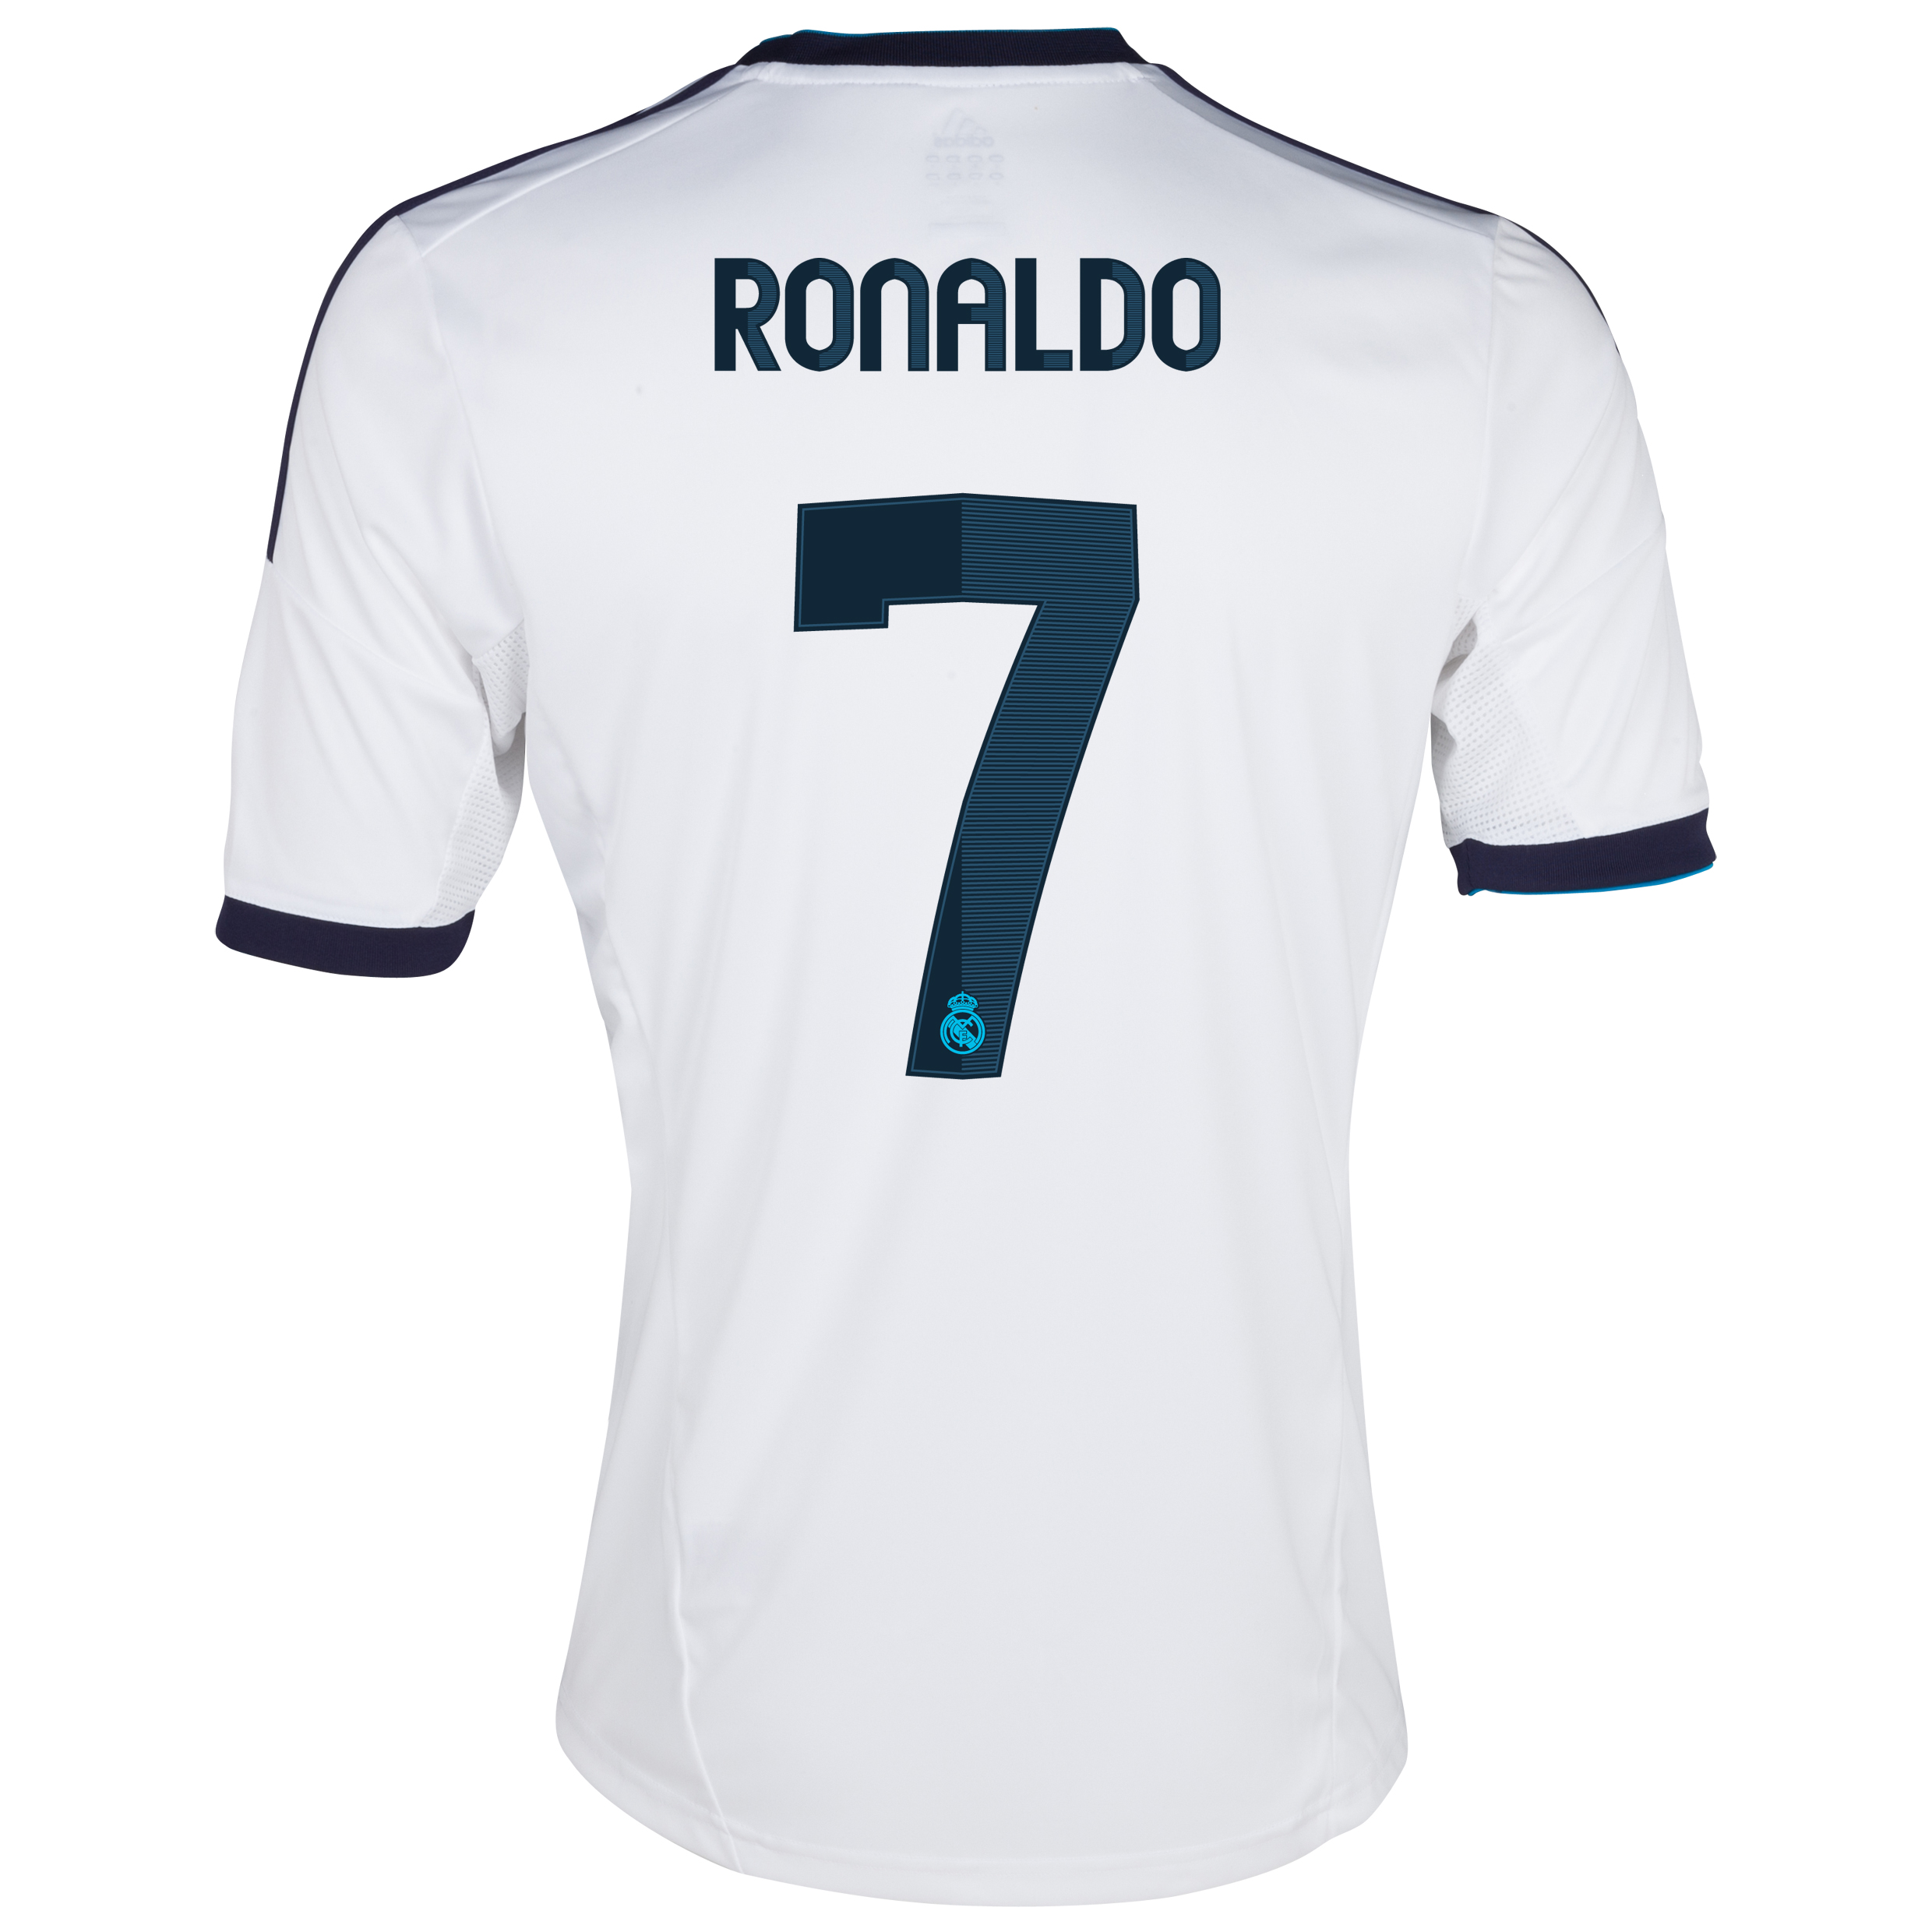 Ronaldo Height on The Official Real Madrid Store